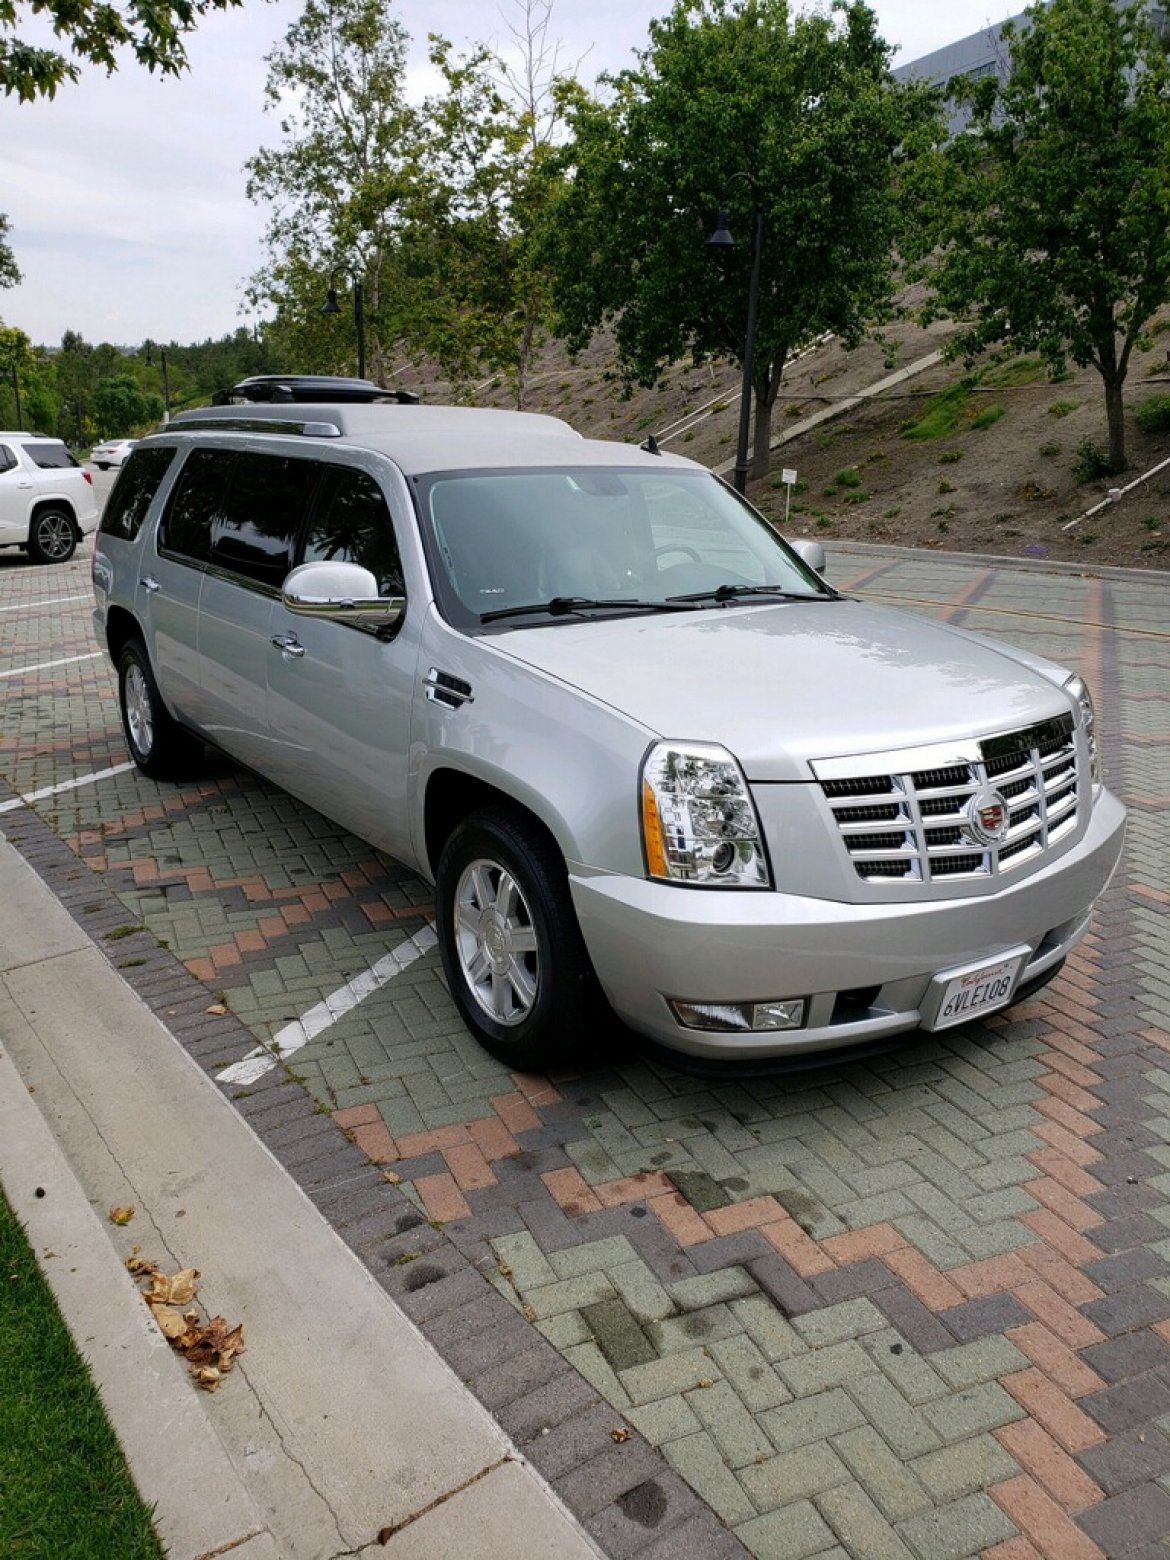 CEO SUV Mobile Office for sale: 2012 Cadillac Escalade by Quality Coachwork